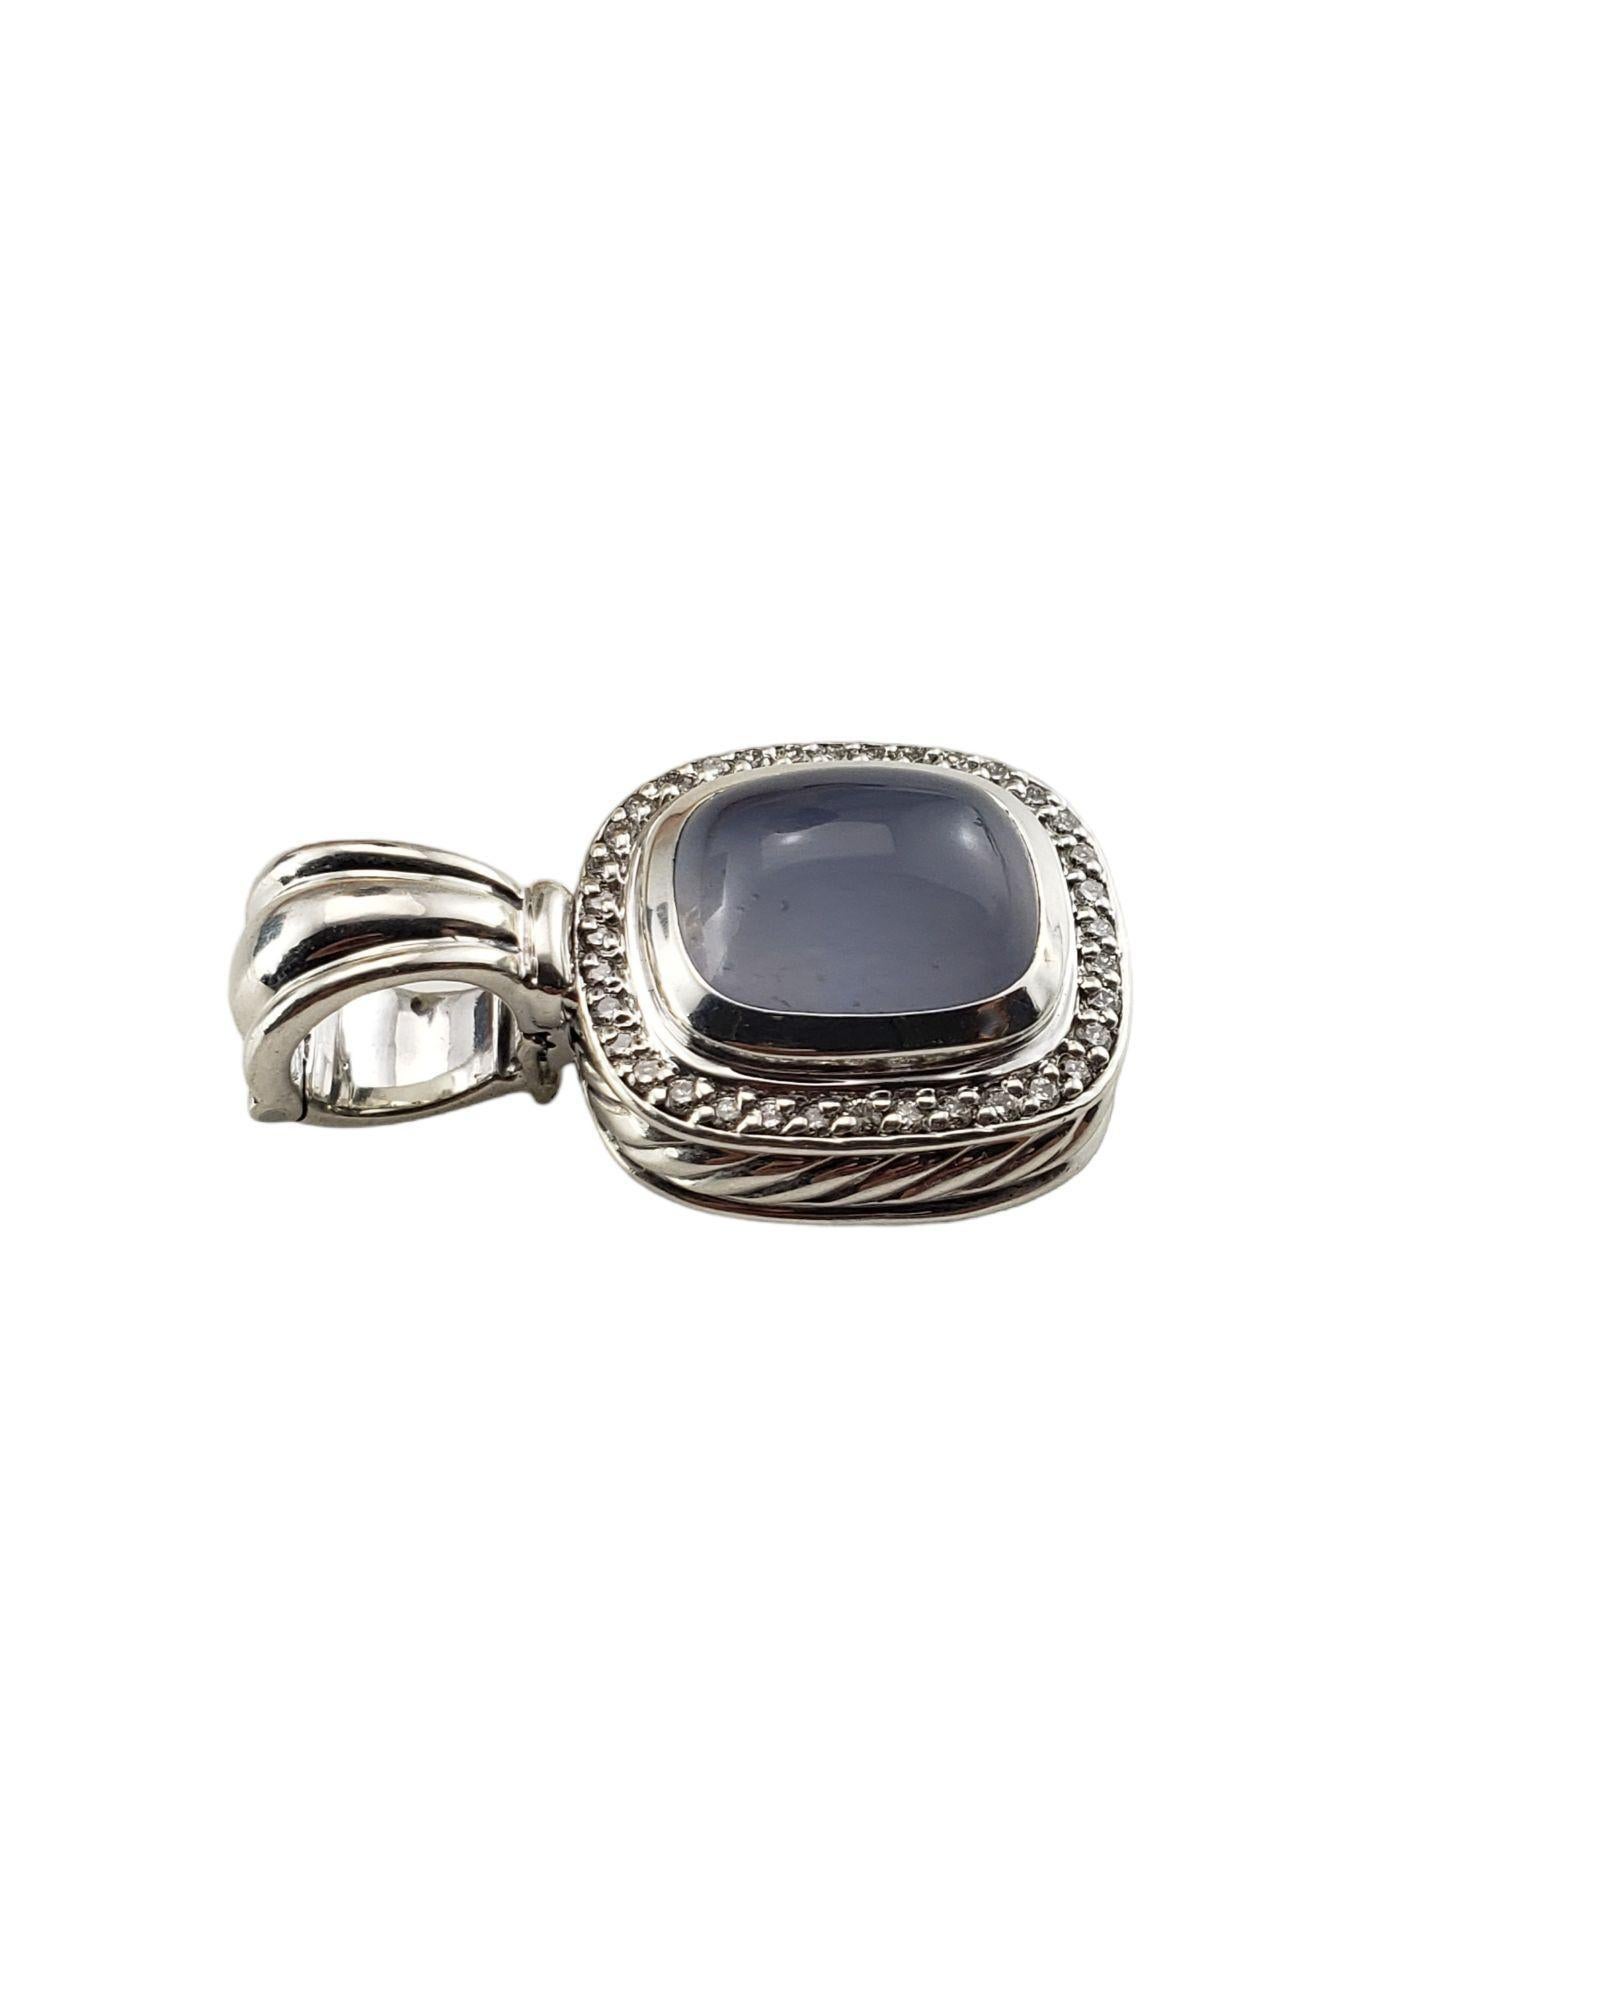 David Yurman Sterling Silver Chalcedony and Diamond Enhancer/Pendant-

This elegant David Yurman piece features one chalcedony stone (12 mm x 9 mm) and 36 round brilliant cut diamonds set in beautifully detailed sterling silver.

Approximate total